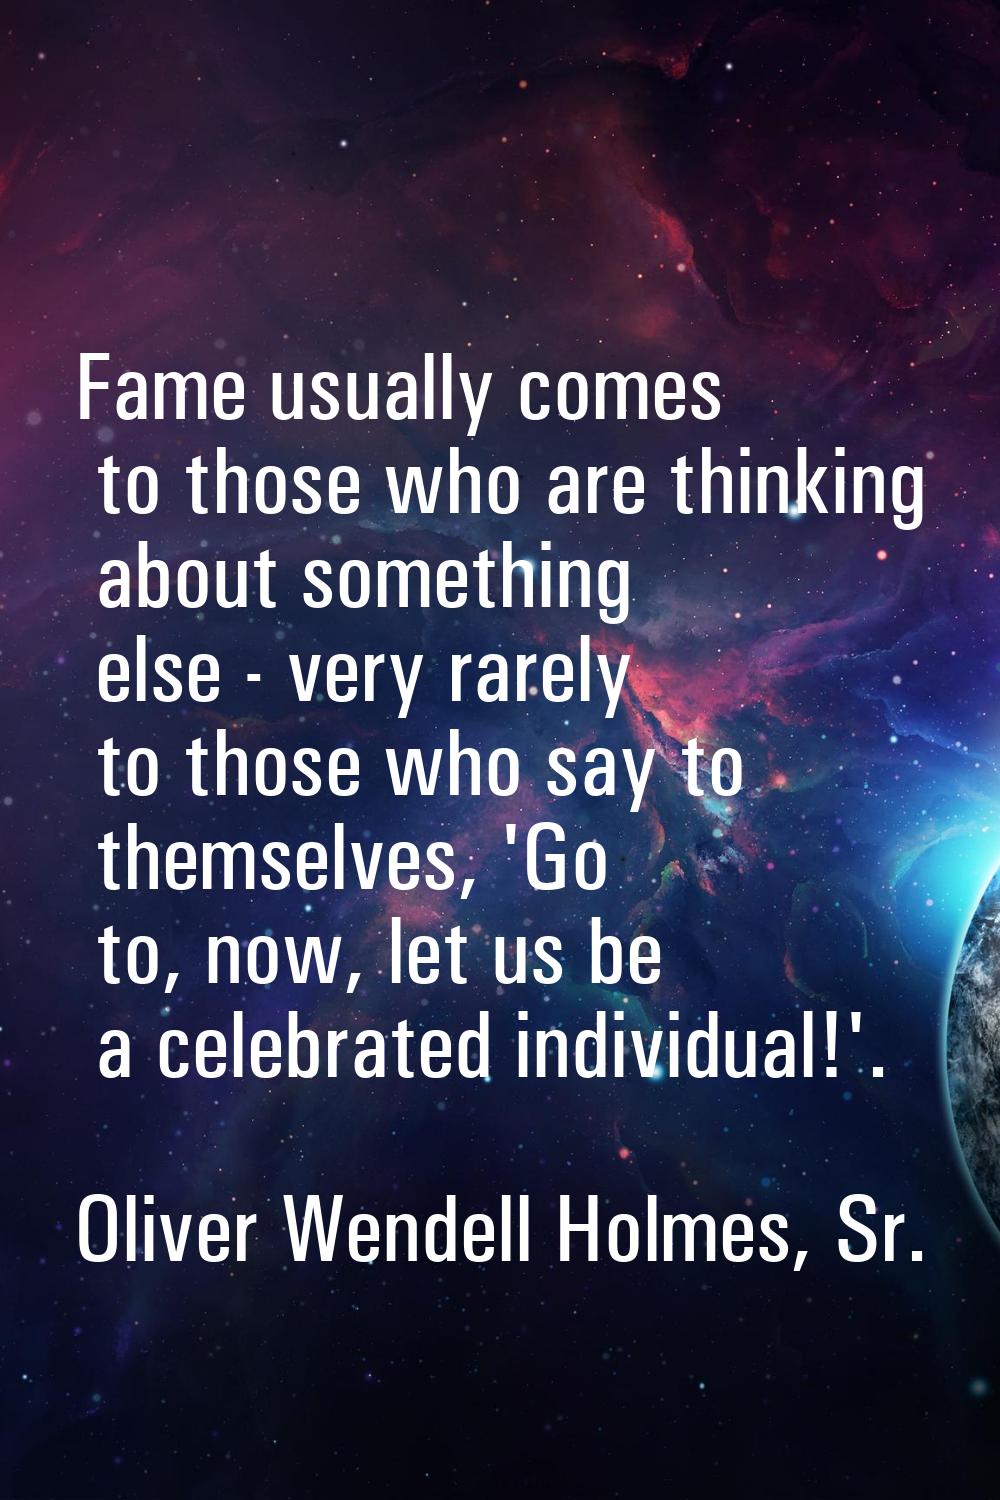 Fame usually comes to those who are thinking about something else - very rarely to those who say to